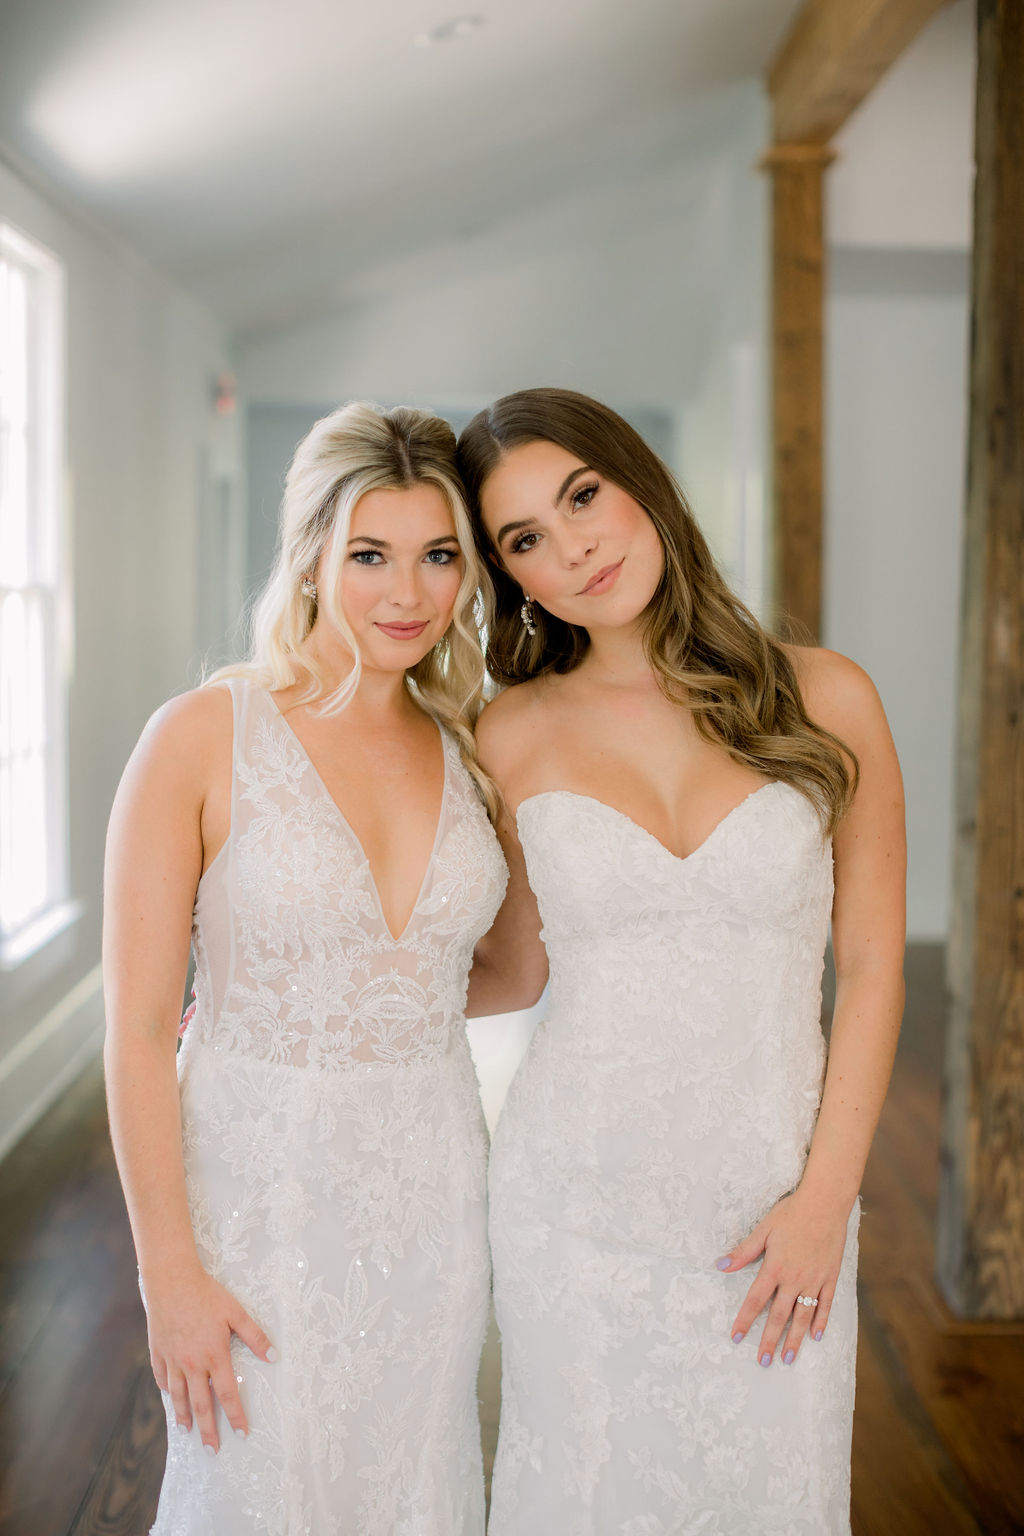 Brides wearing shimmering sequin bridal gowns from I Do Bridal Couture. Photo: Emily Songer Photography